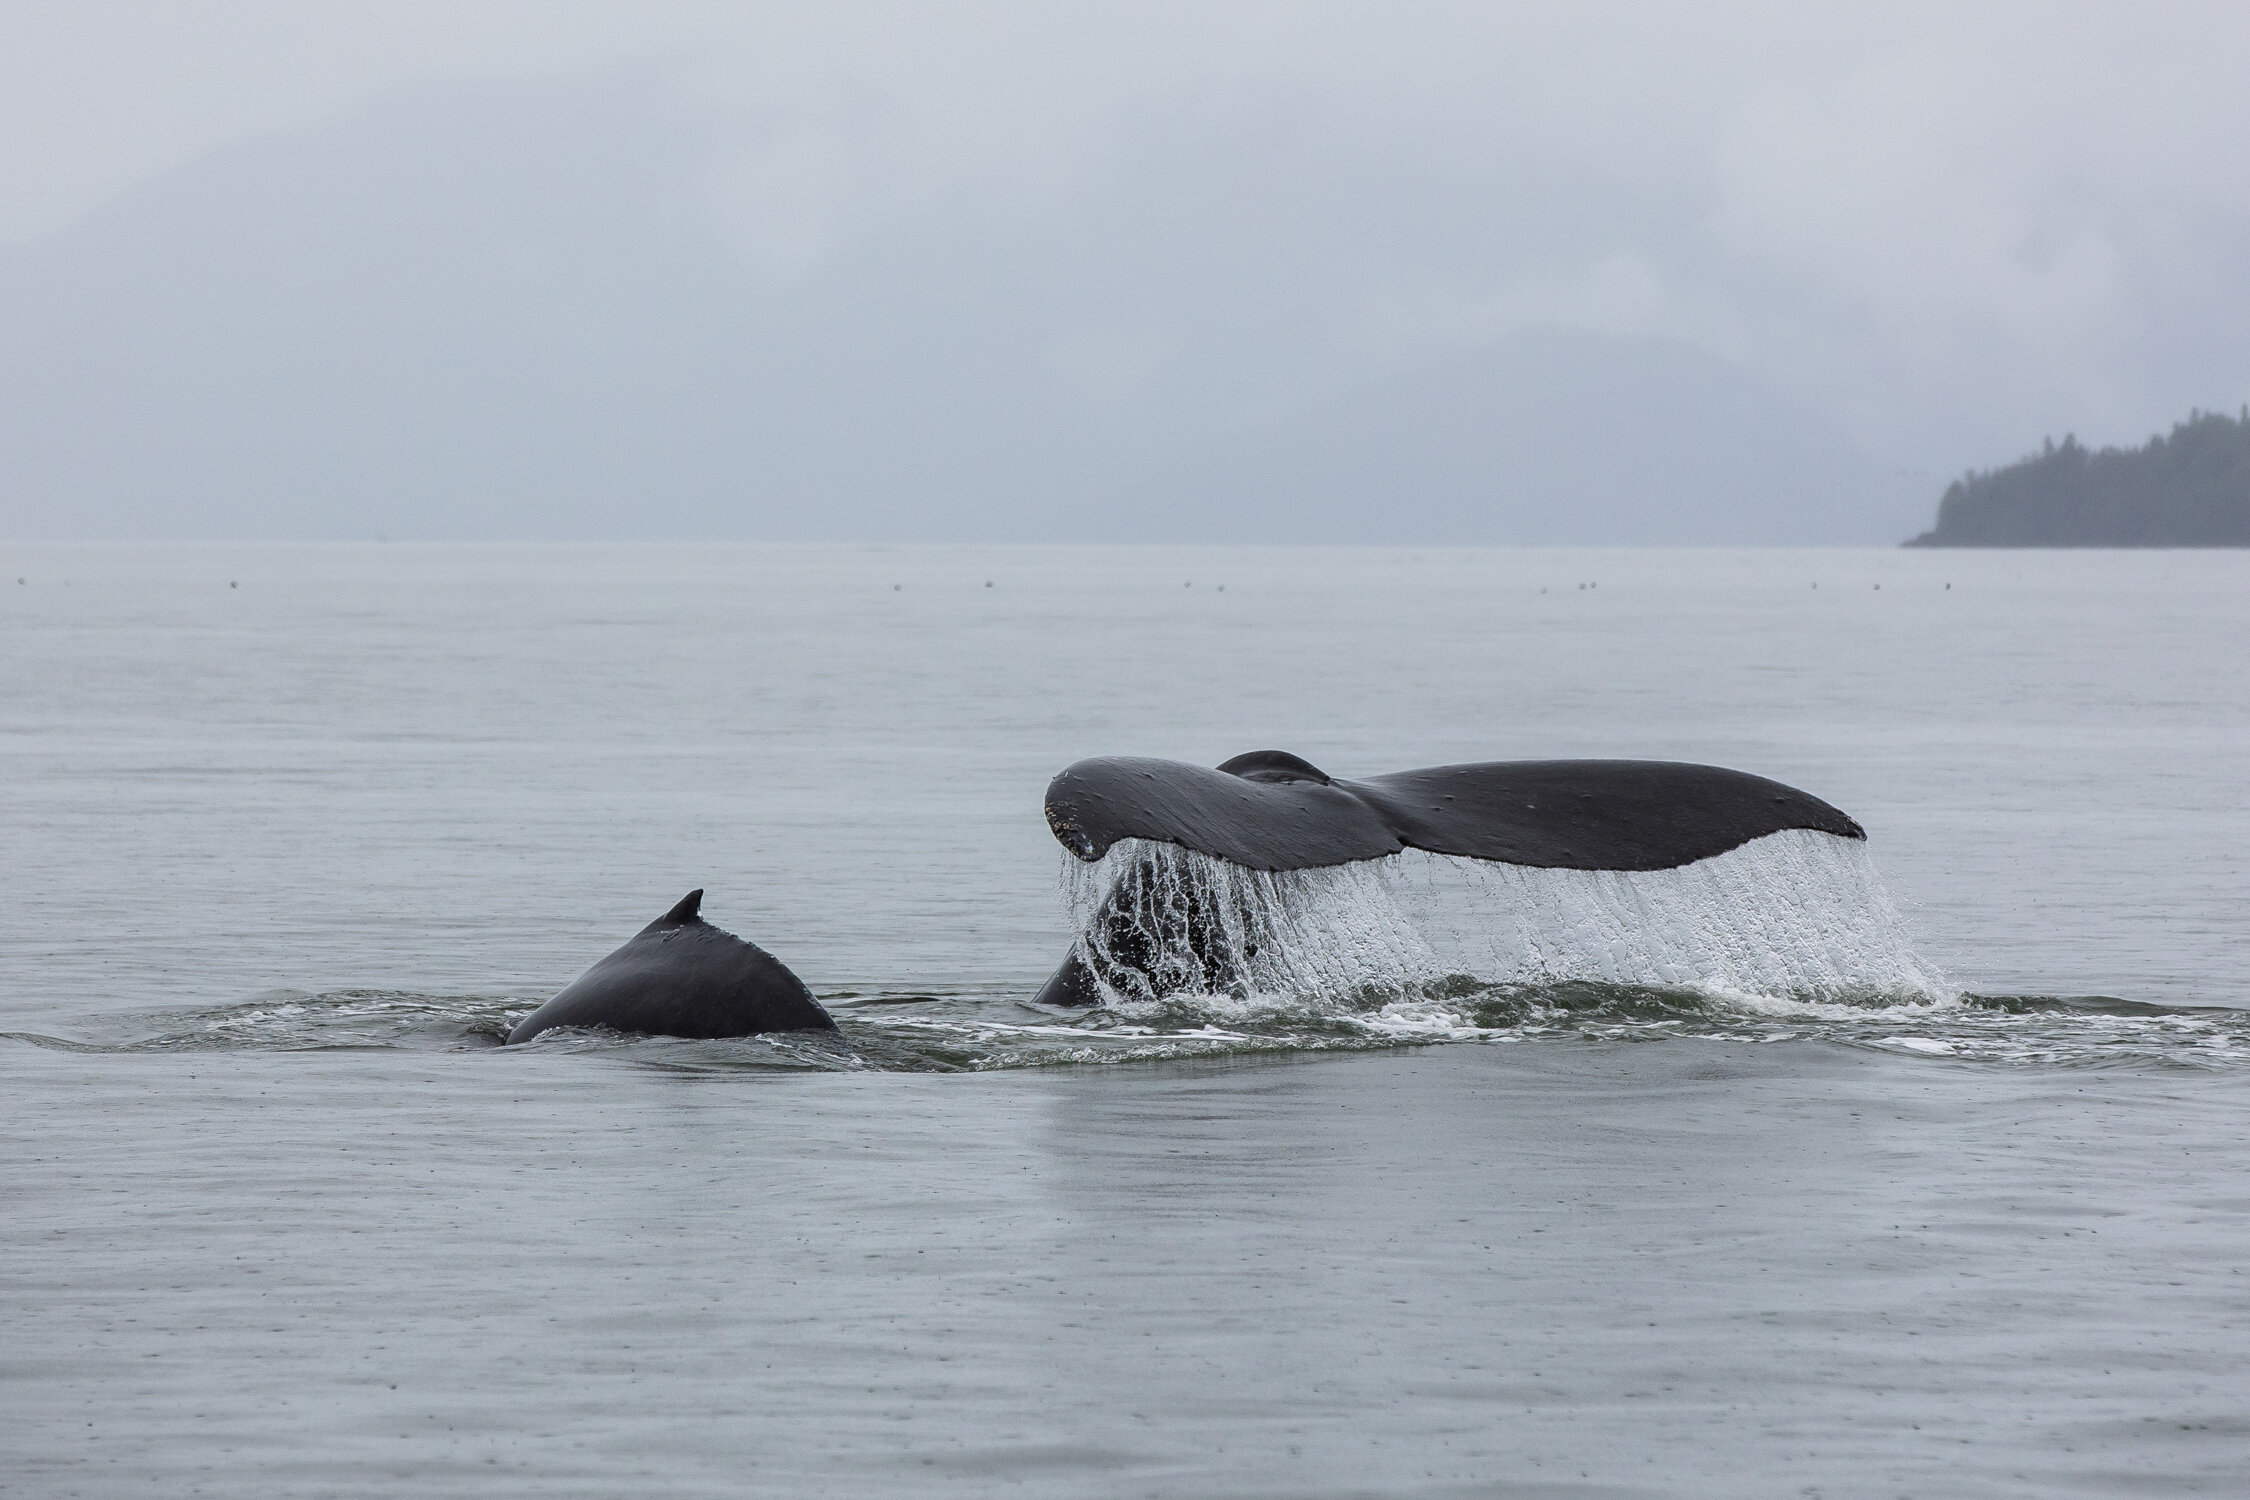 Luxury whale watching in Juneau // 10 Things You Have To Do in Southeast Alaska